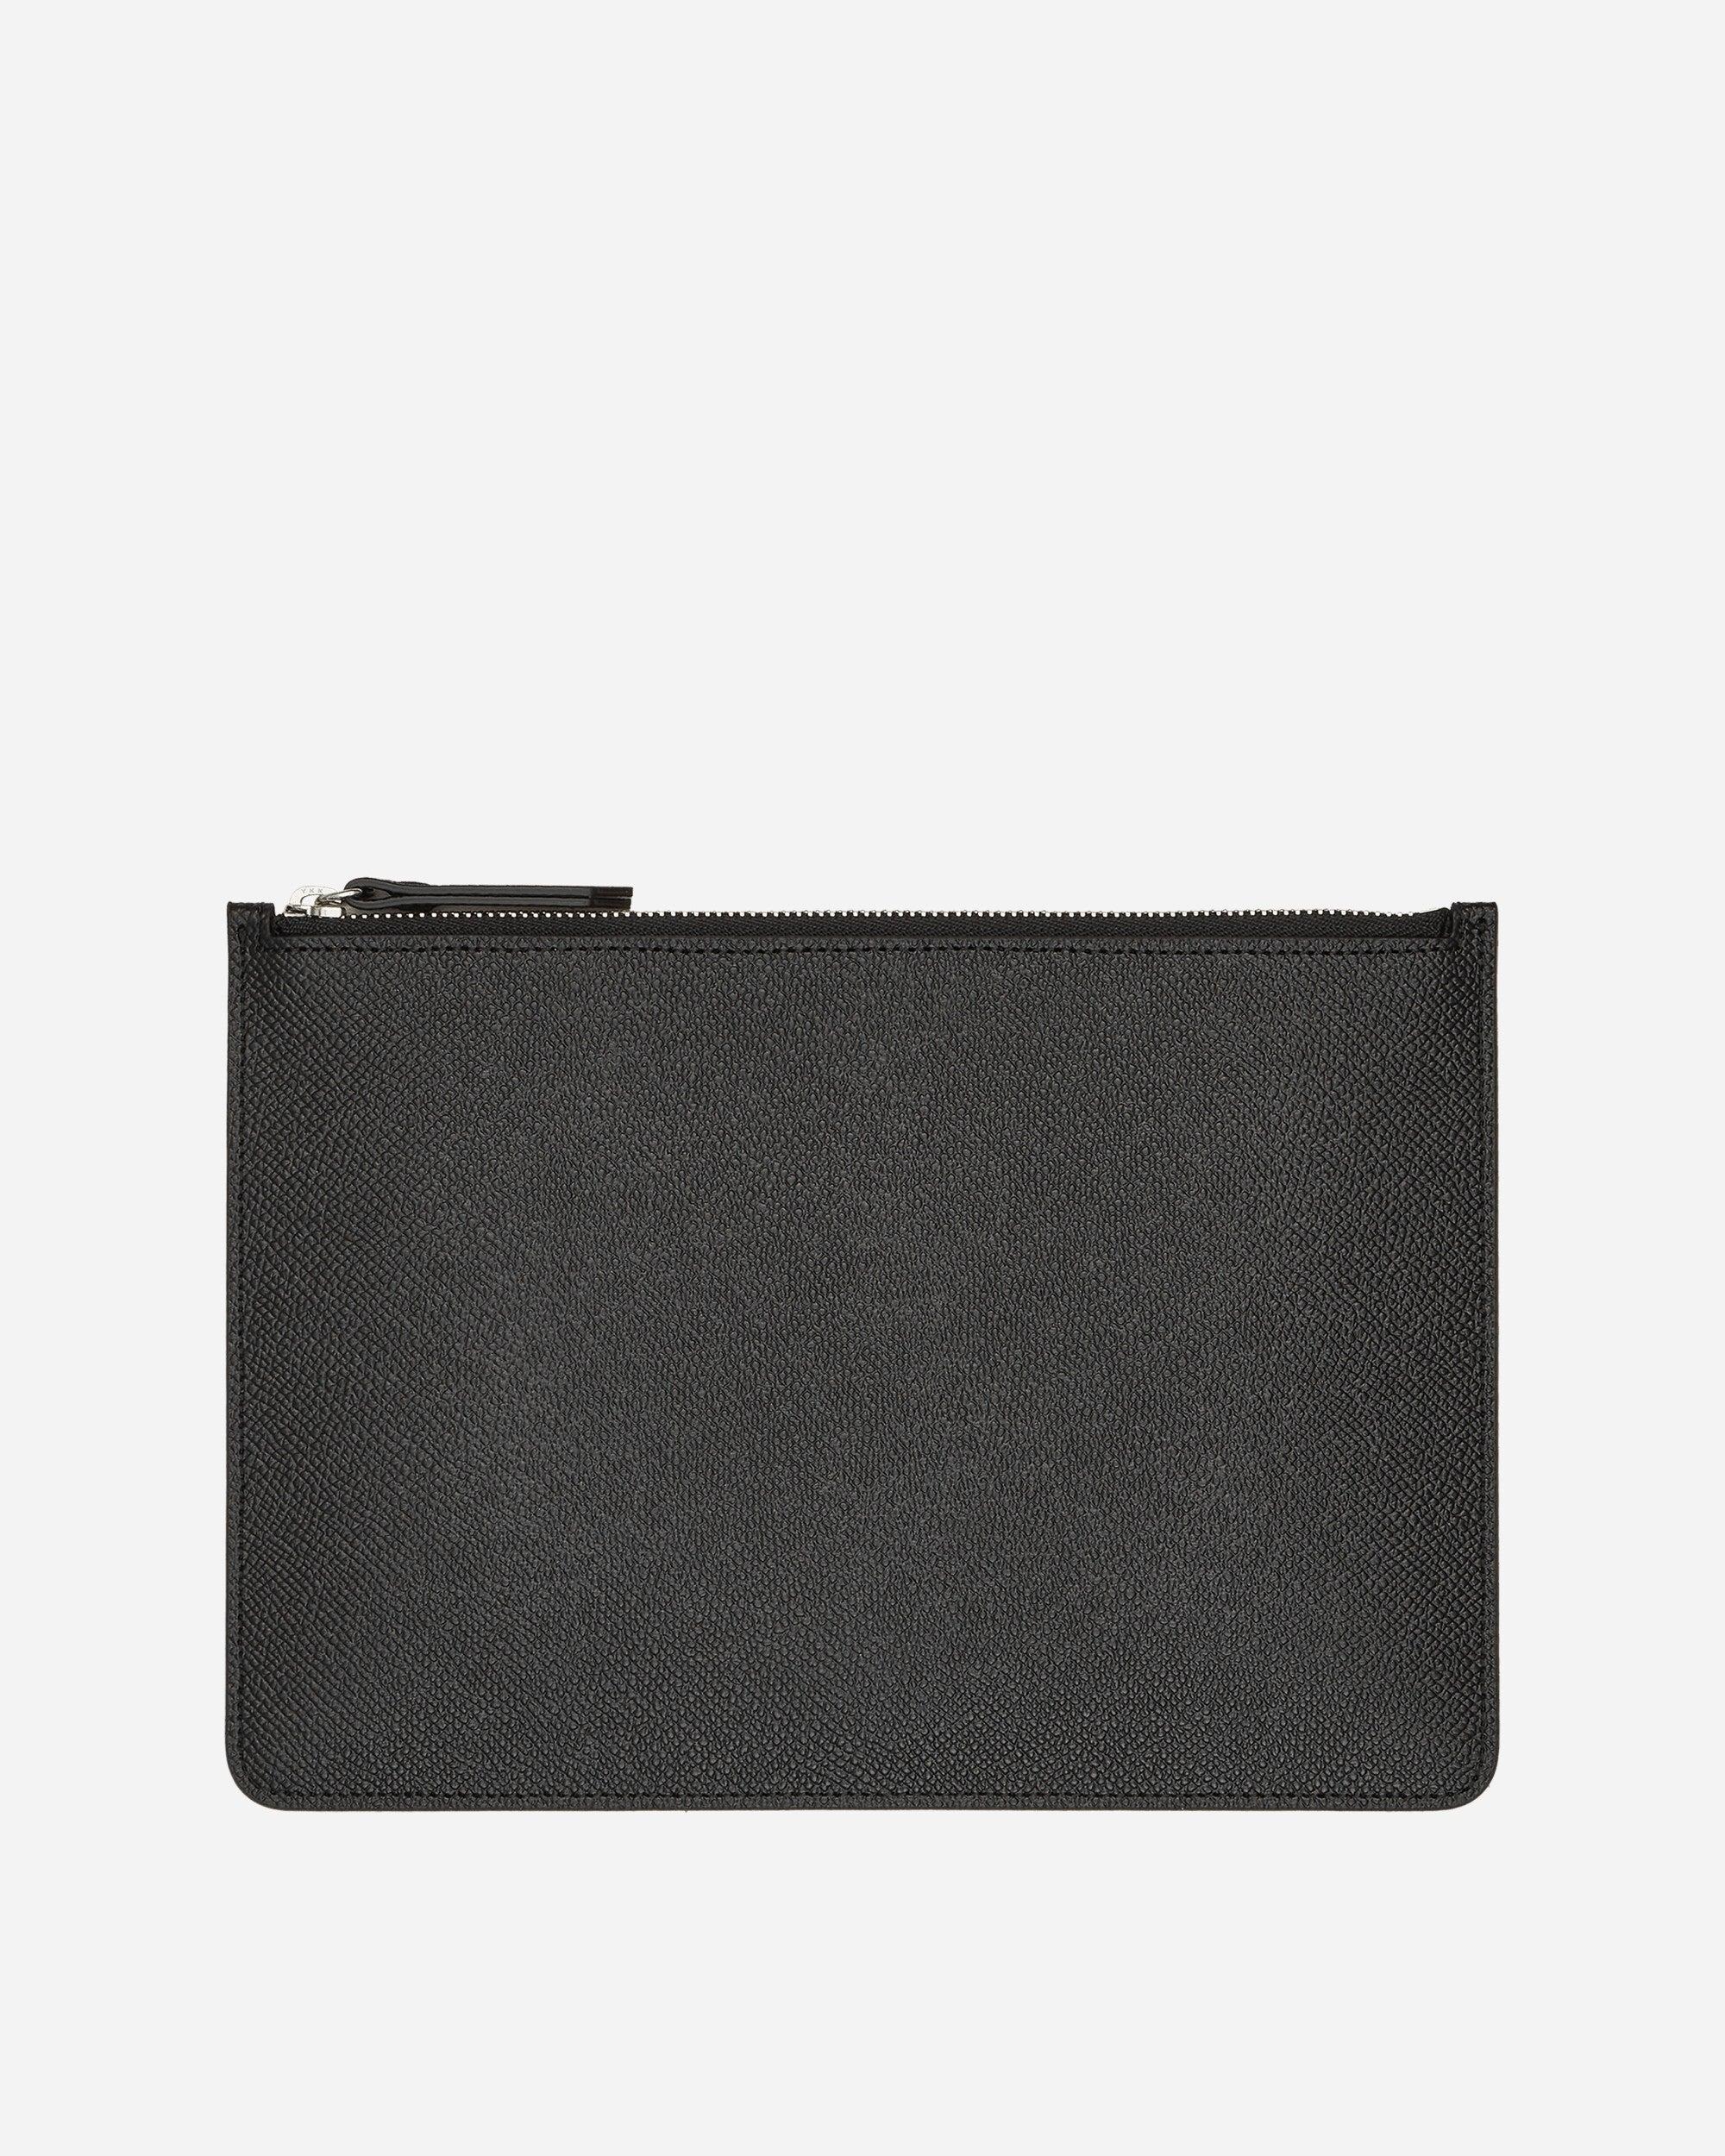 Maison Margiela Four Stitches Small Pouch in Black for Men | Lyst UK